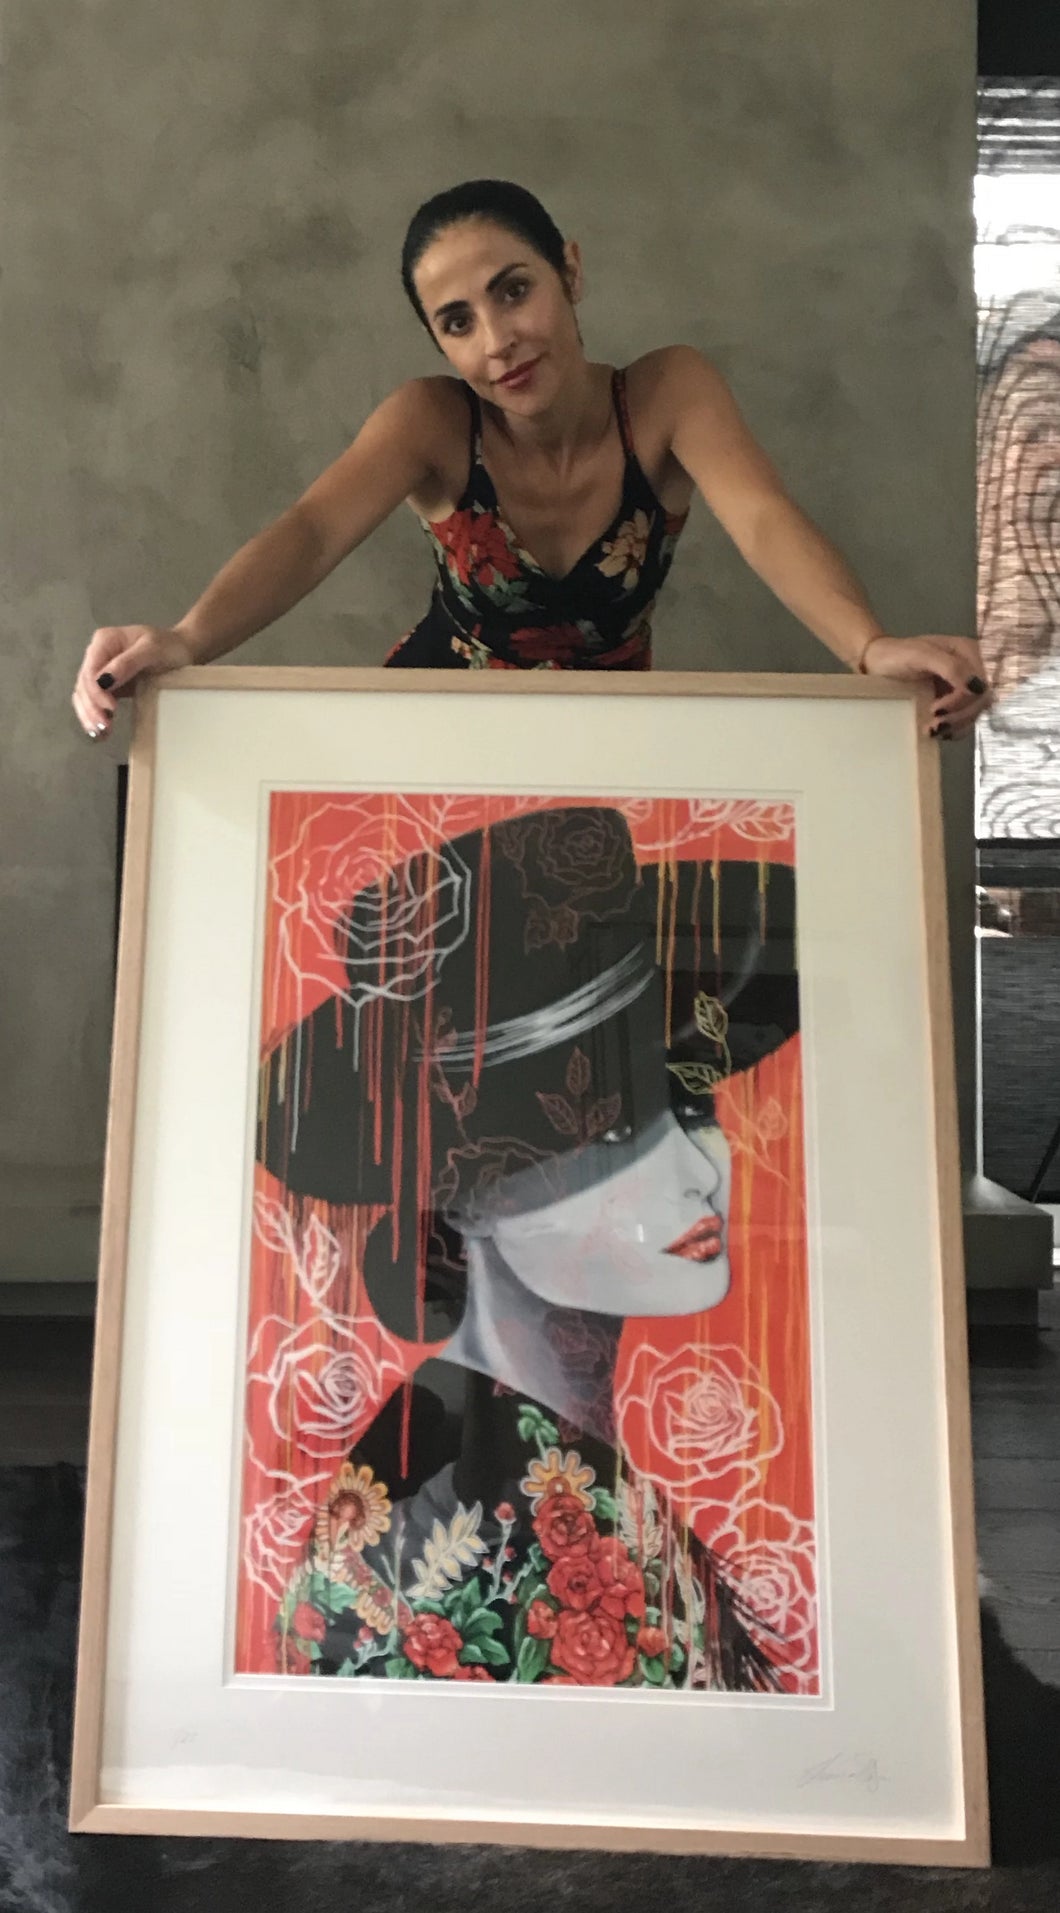 Ole' - Beautiful Spanish woman portrait. Limited Edition Print - framed or unframed